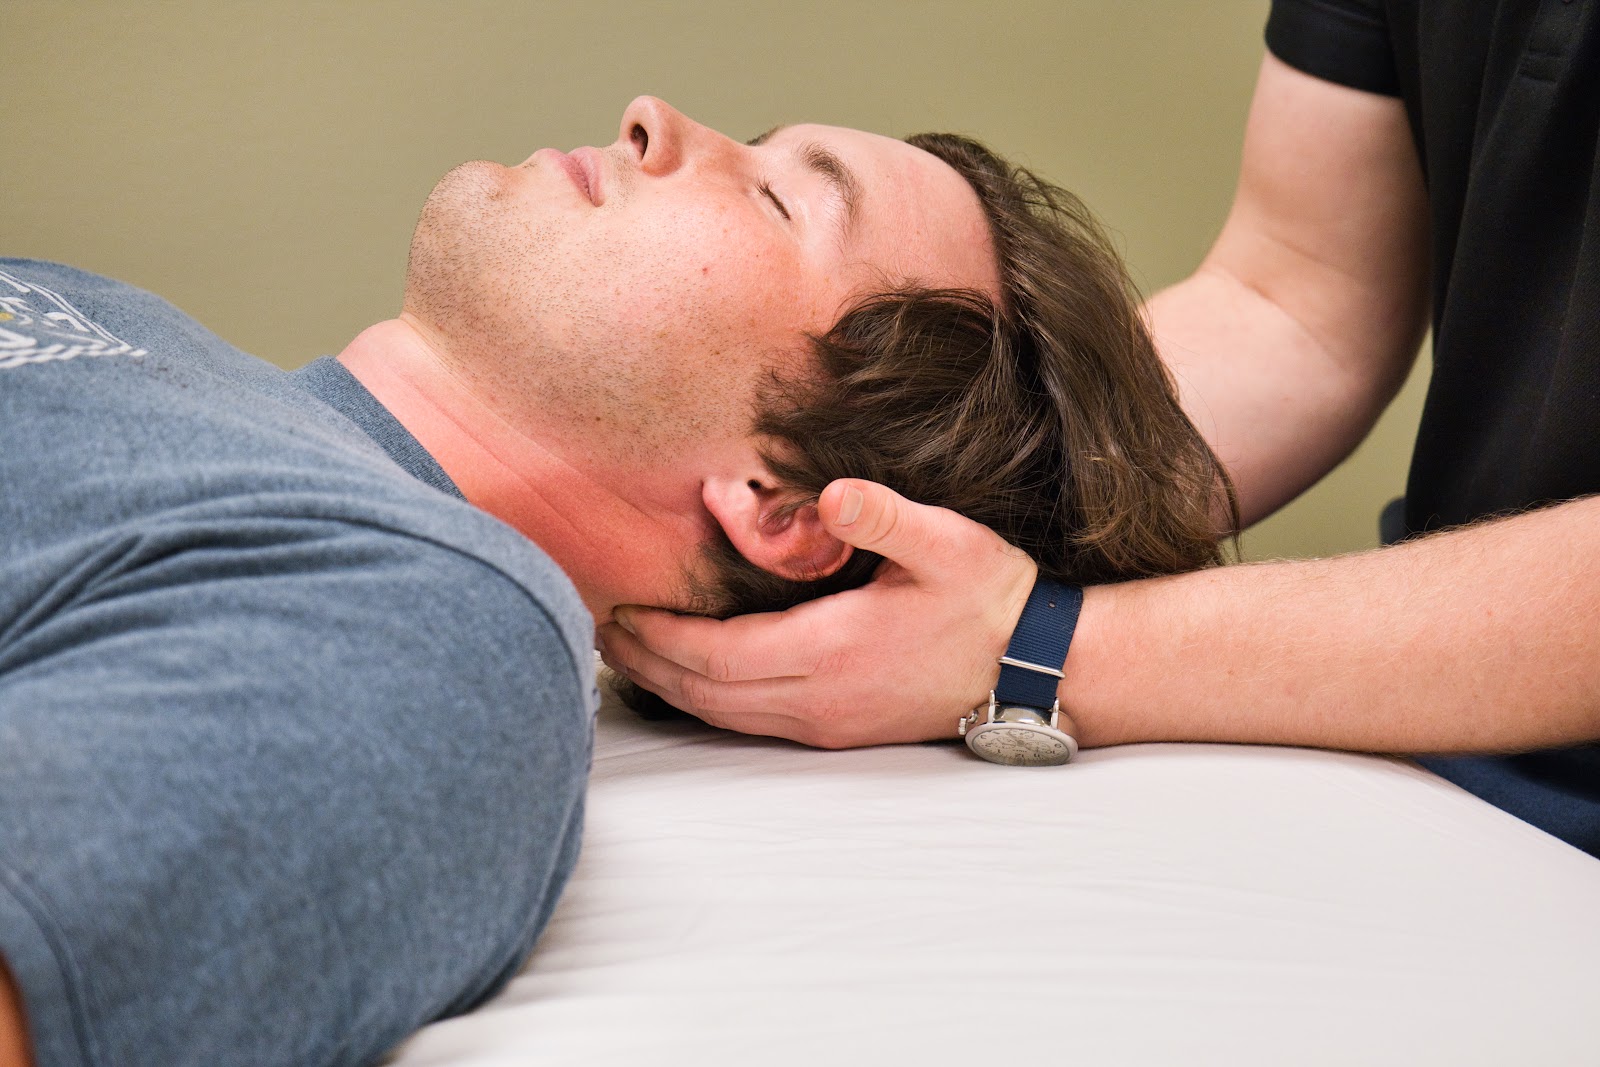 Treatment may include relaxing the neck muscles. 